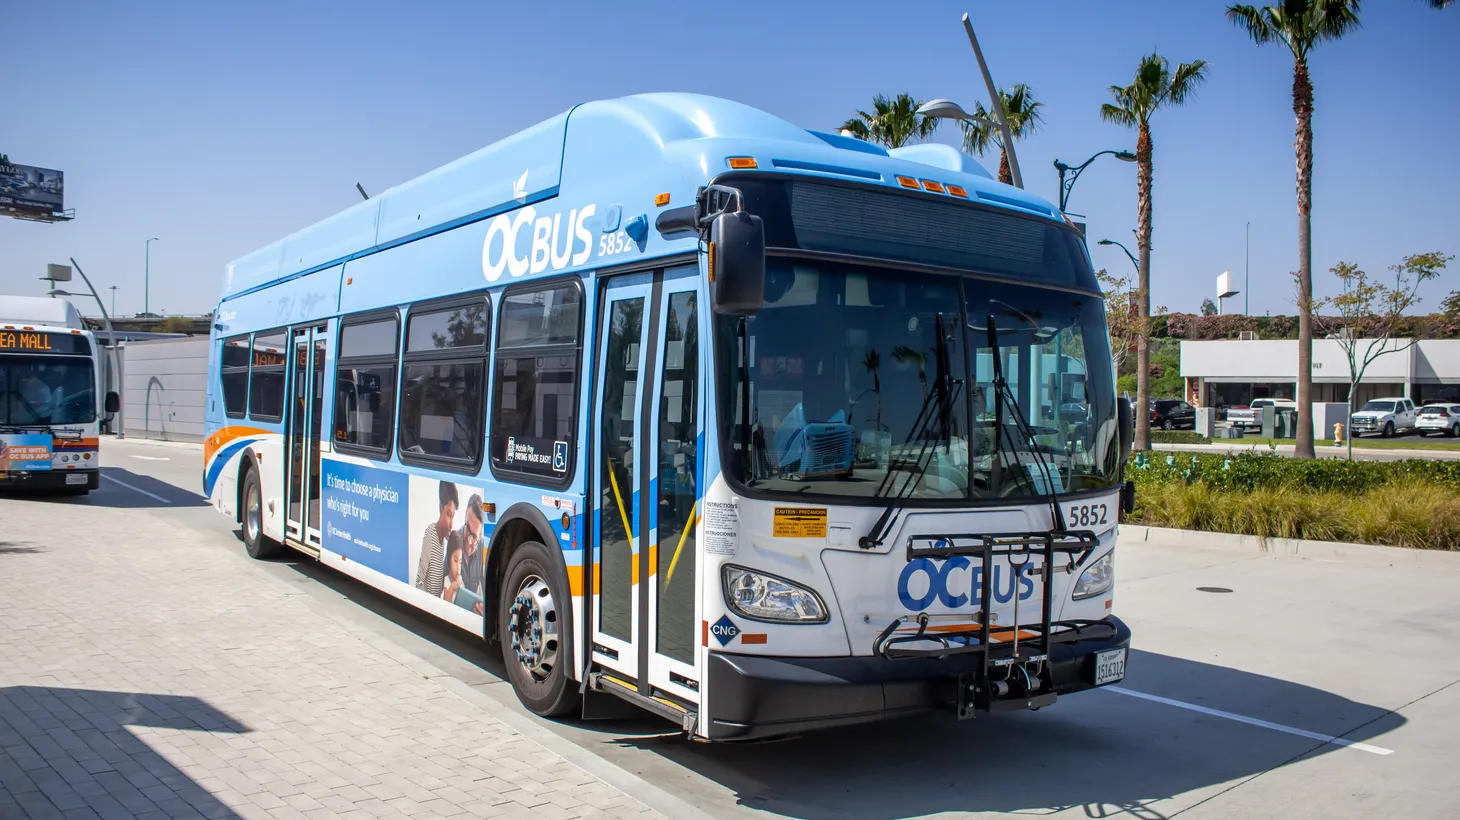 Orange County Transportation Authority (OCTA) says it stands to lose as much as $26 million for its public bus services if State Senator Tom Umberg’s recent bill takes effect.